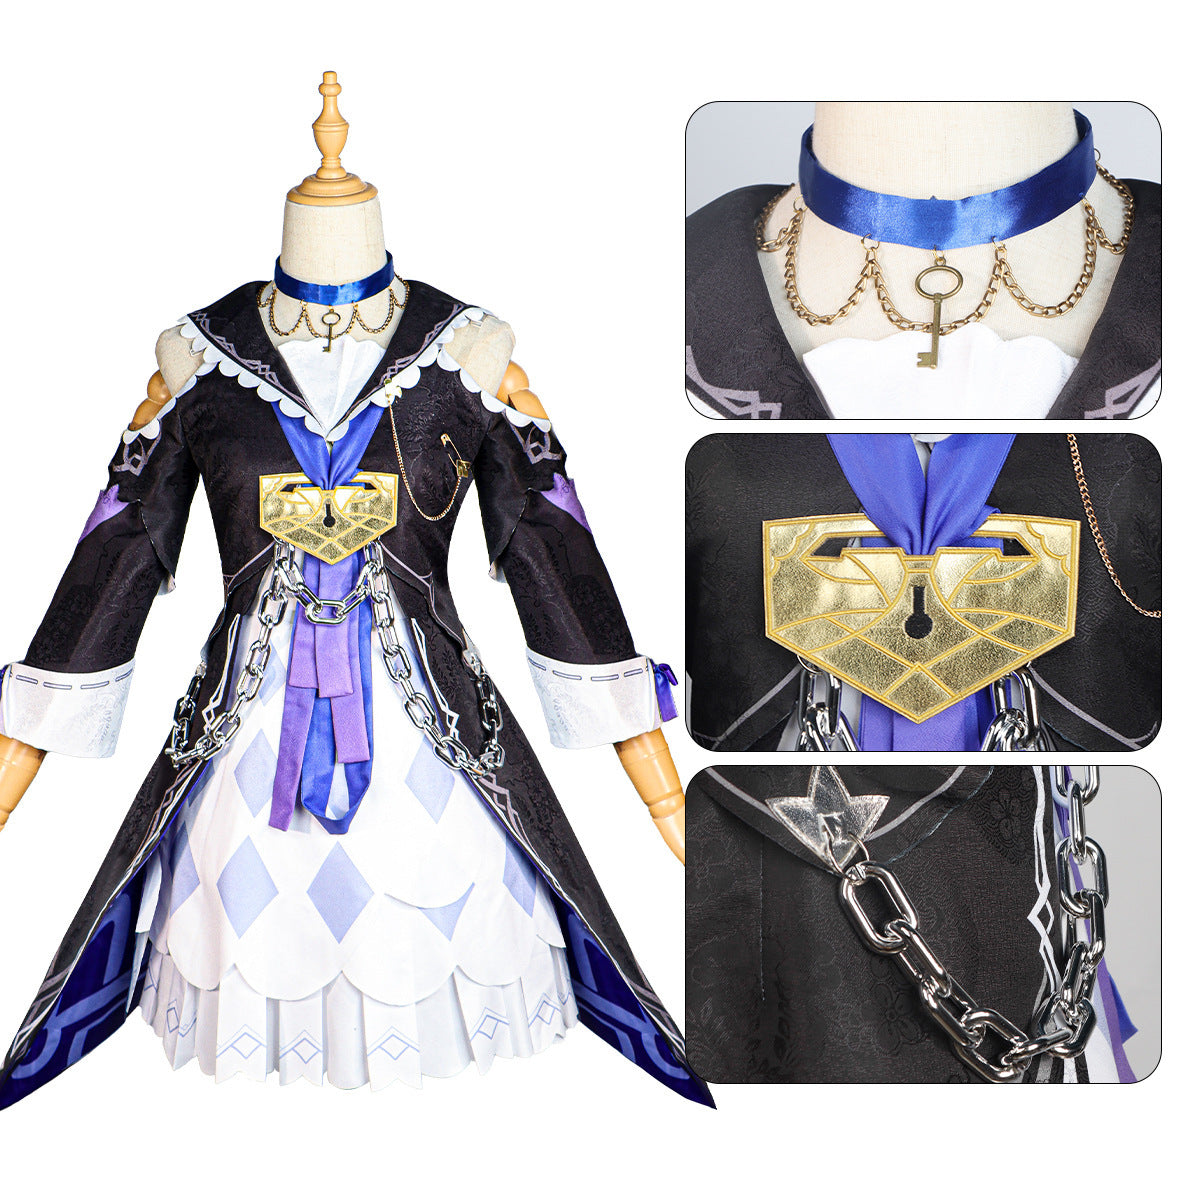 Rulercosplay Honkai Star Rail Herta Uniform Suit Cosplay Costume With Accessories For Halloween Party